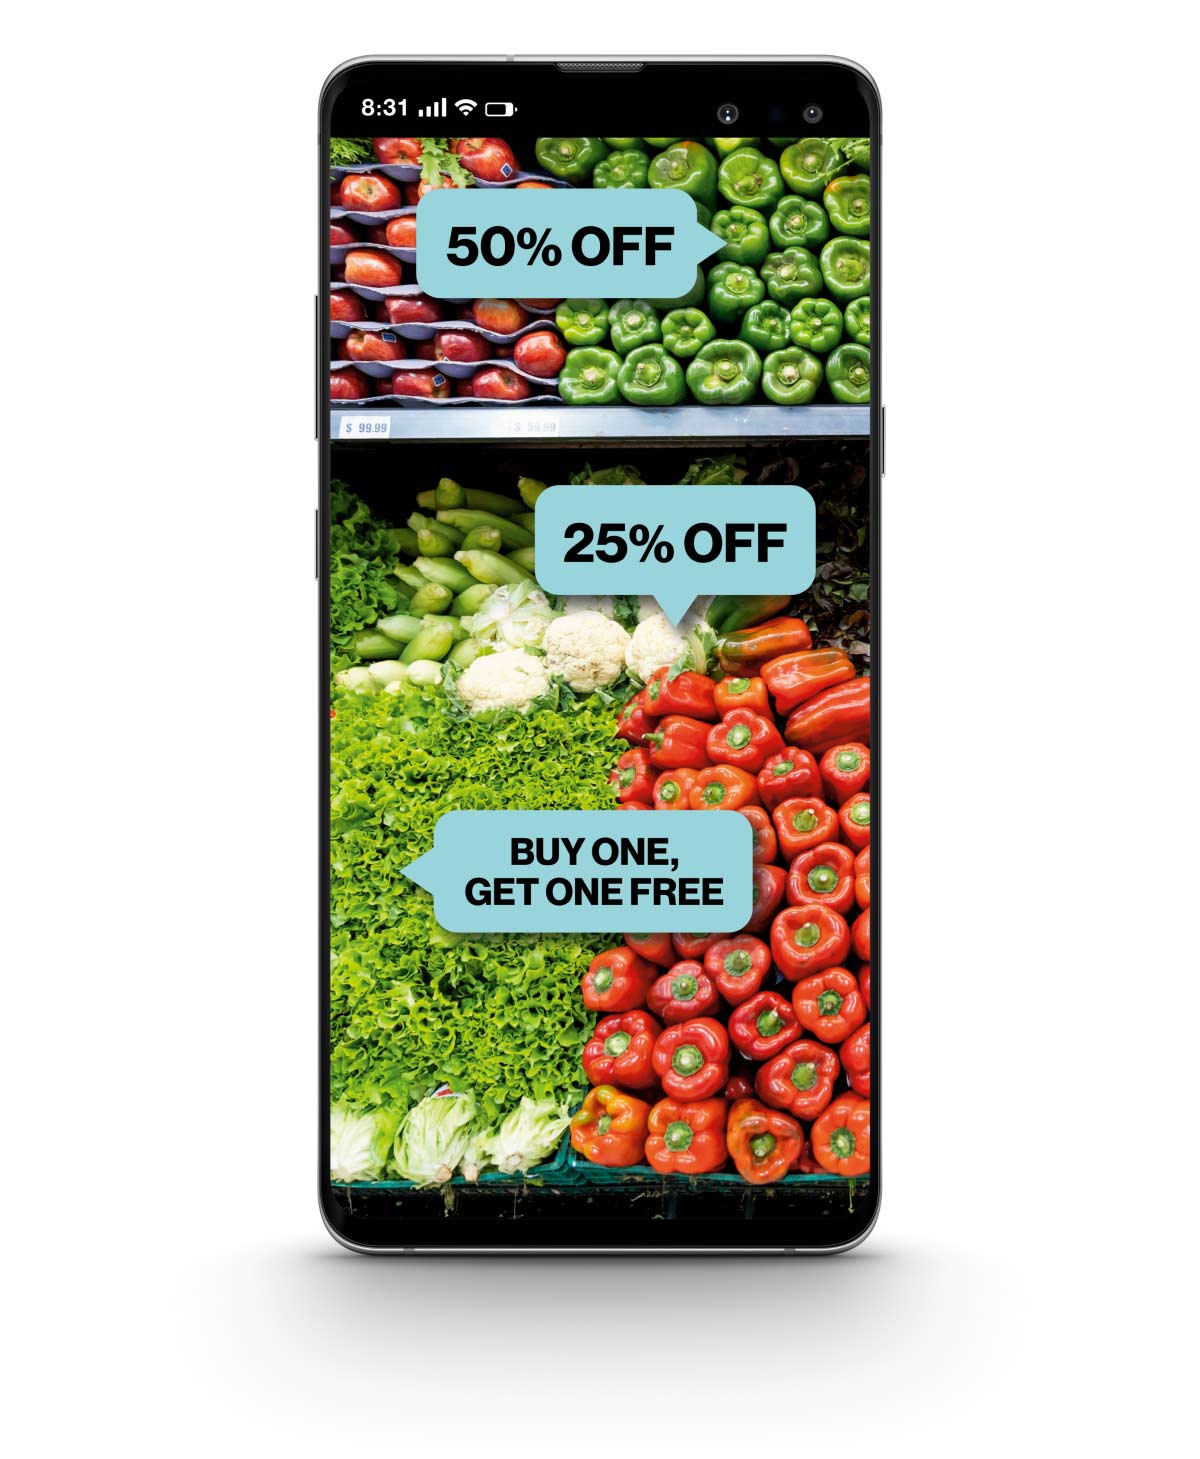 Image of grocery discounts on mobile phone.